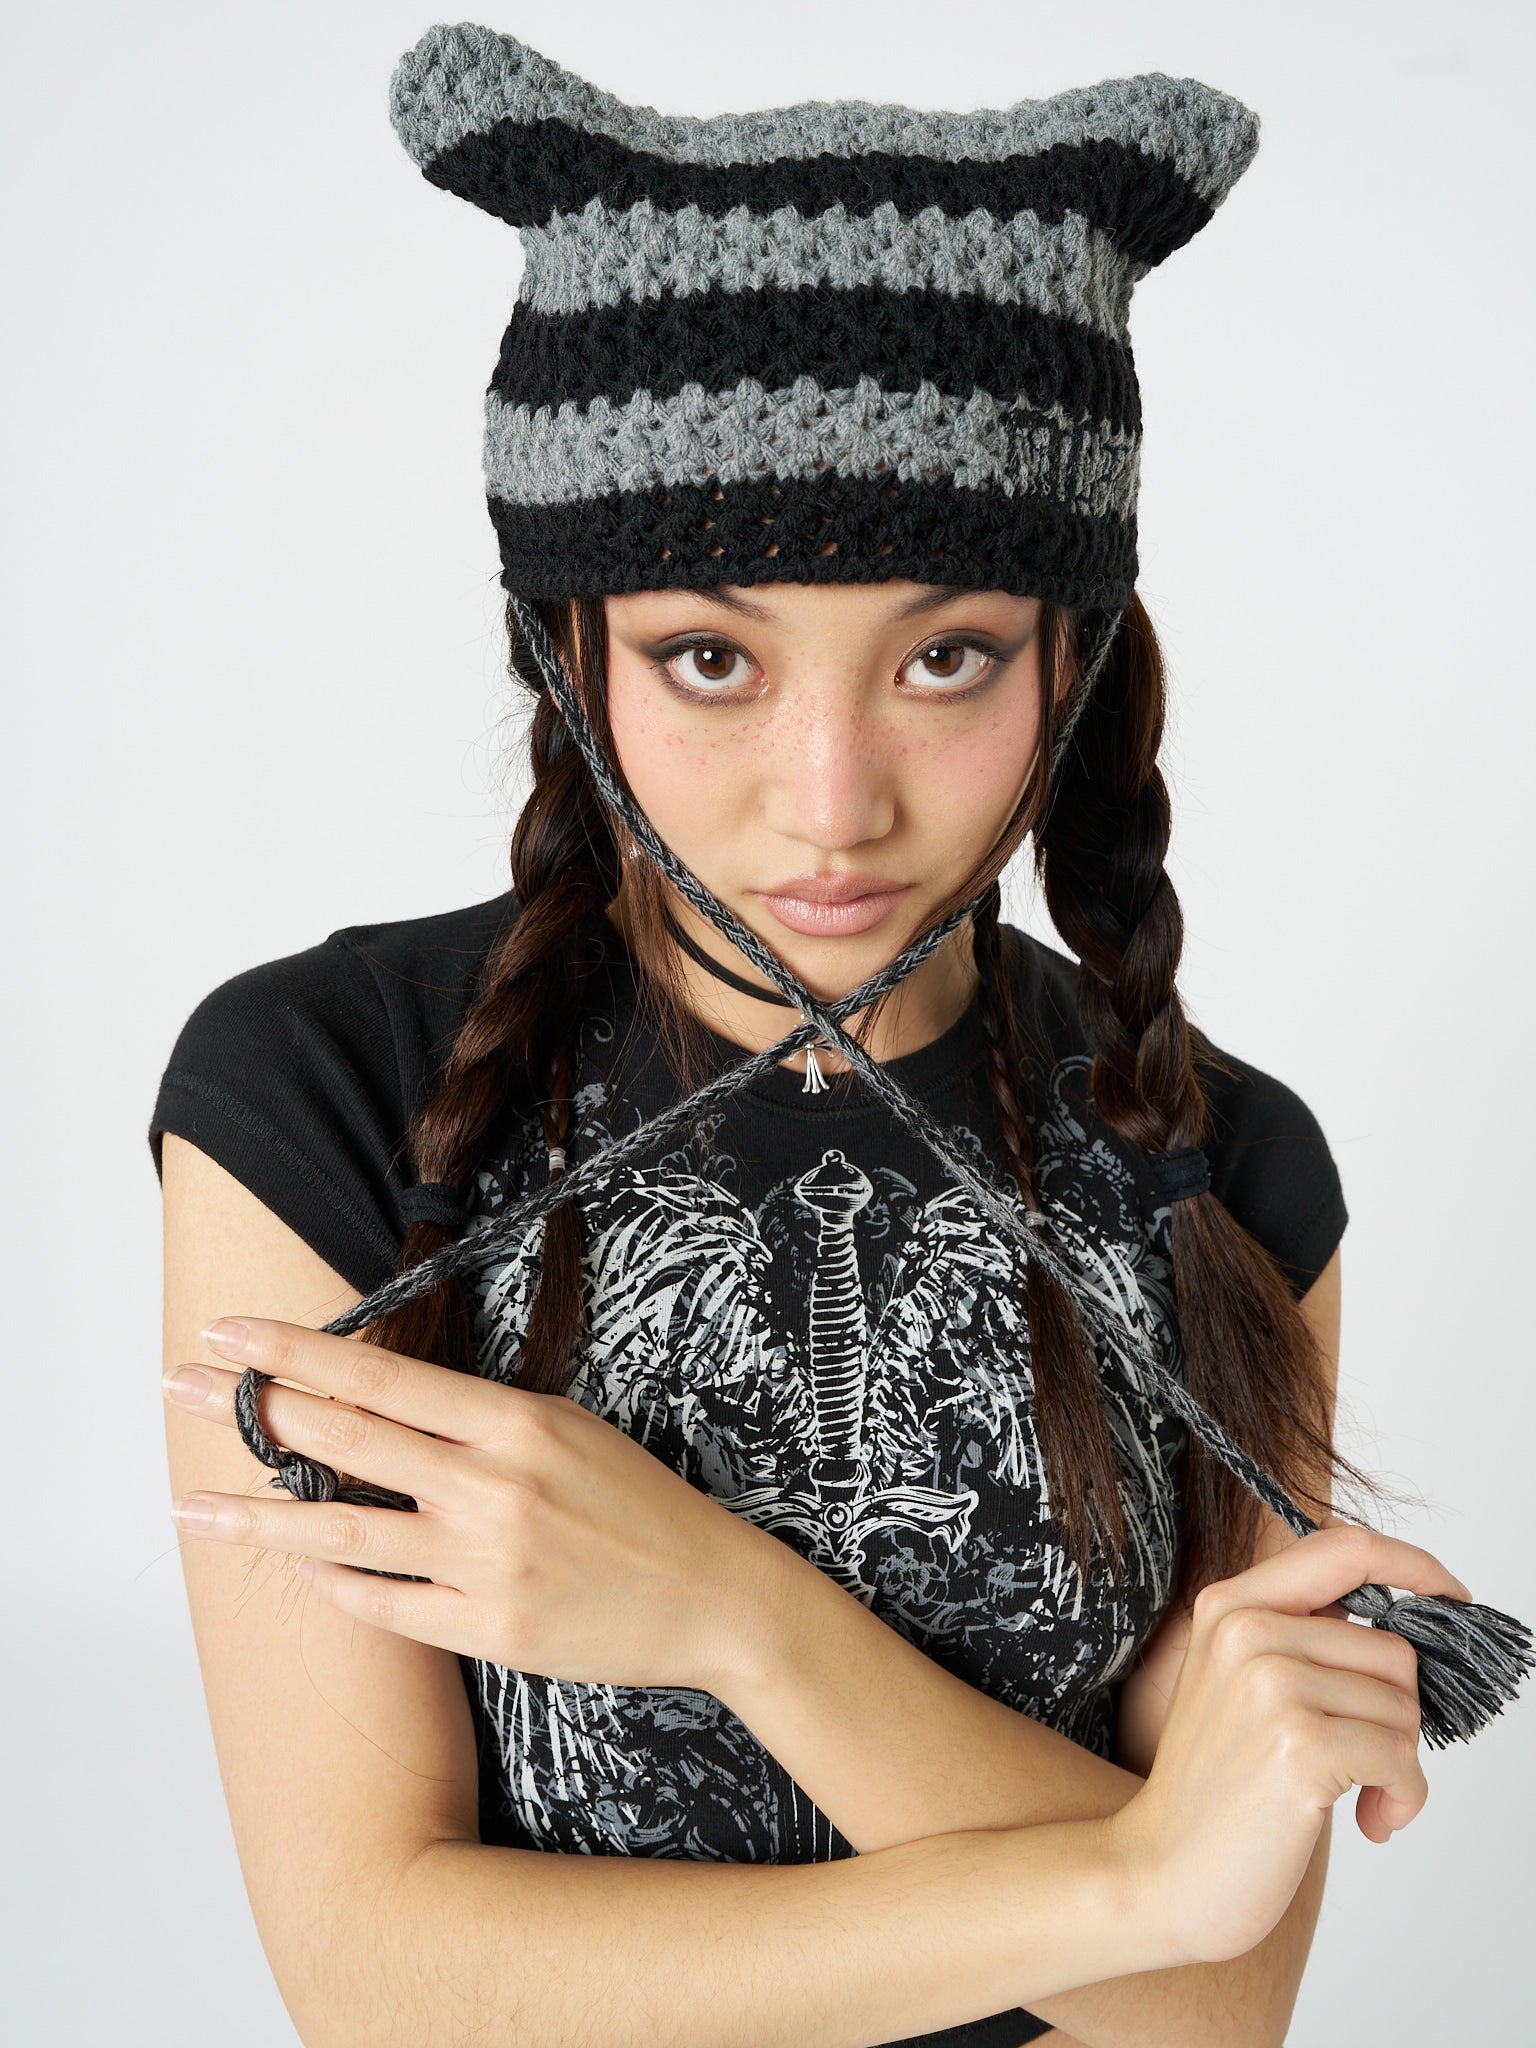 A knit hat named Greta with striped pattern and a tie detail by Minga London. This hat combines style and warmth, making it a trendy and practical accessory for the colder seasons.